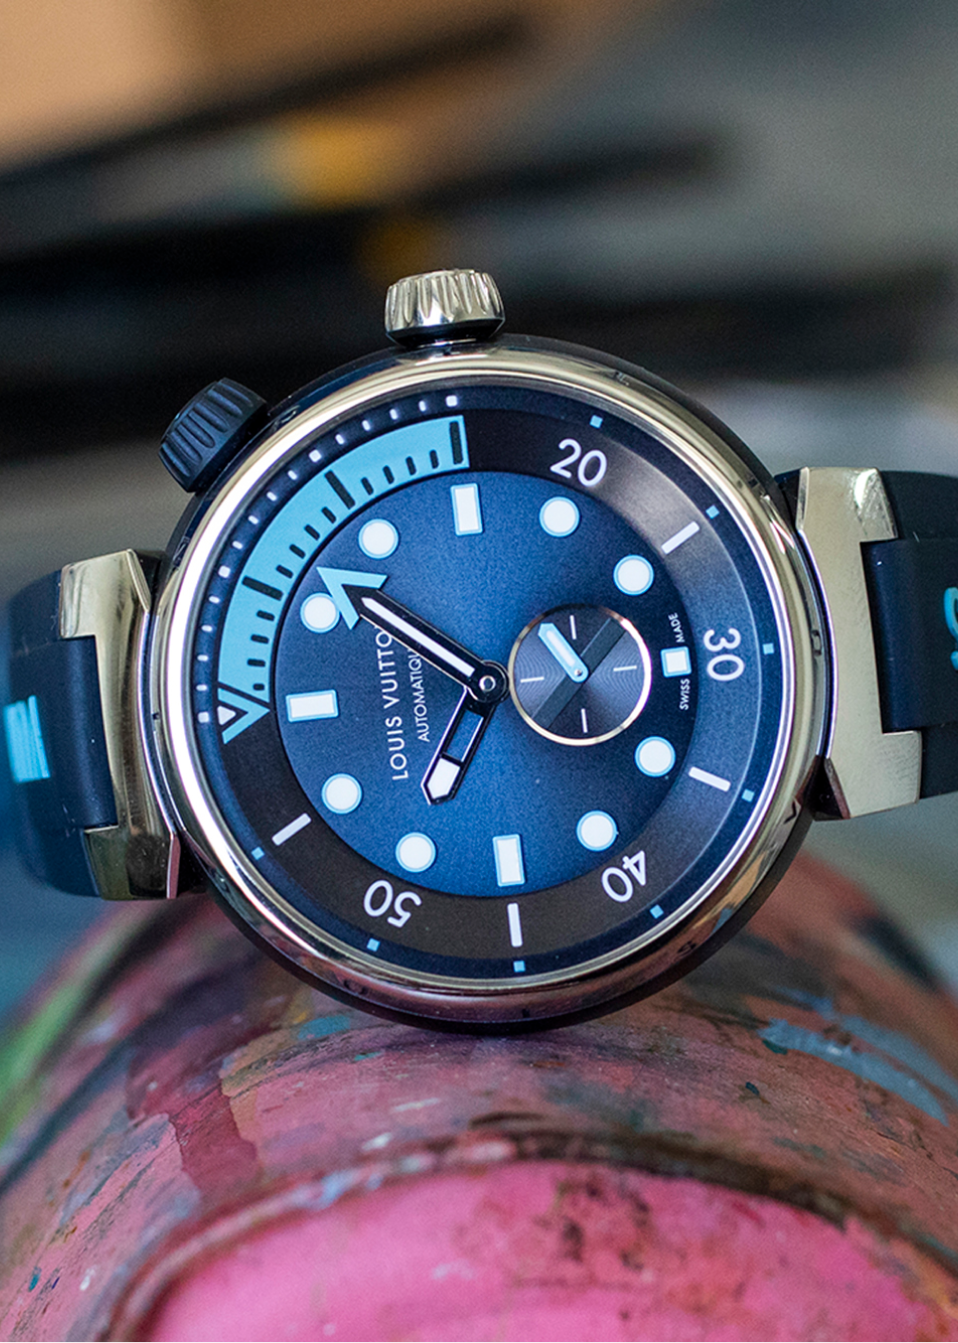 Louis Vuitton Adds a Chrono to Its Sporty Tambour Street Diver